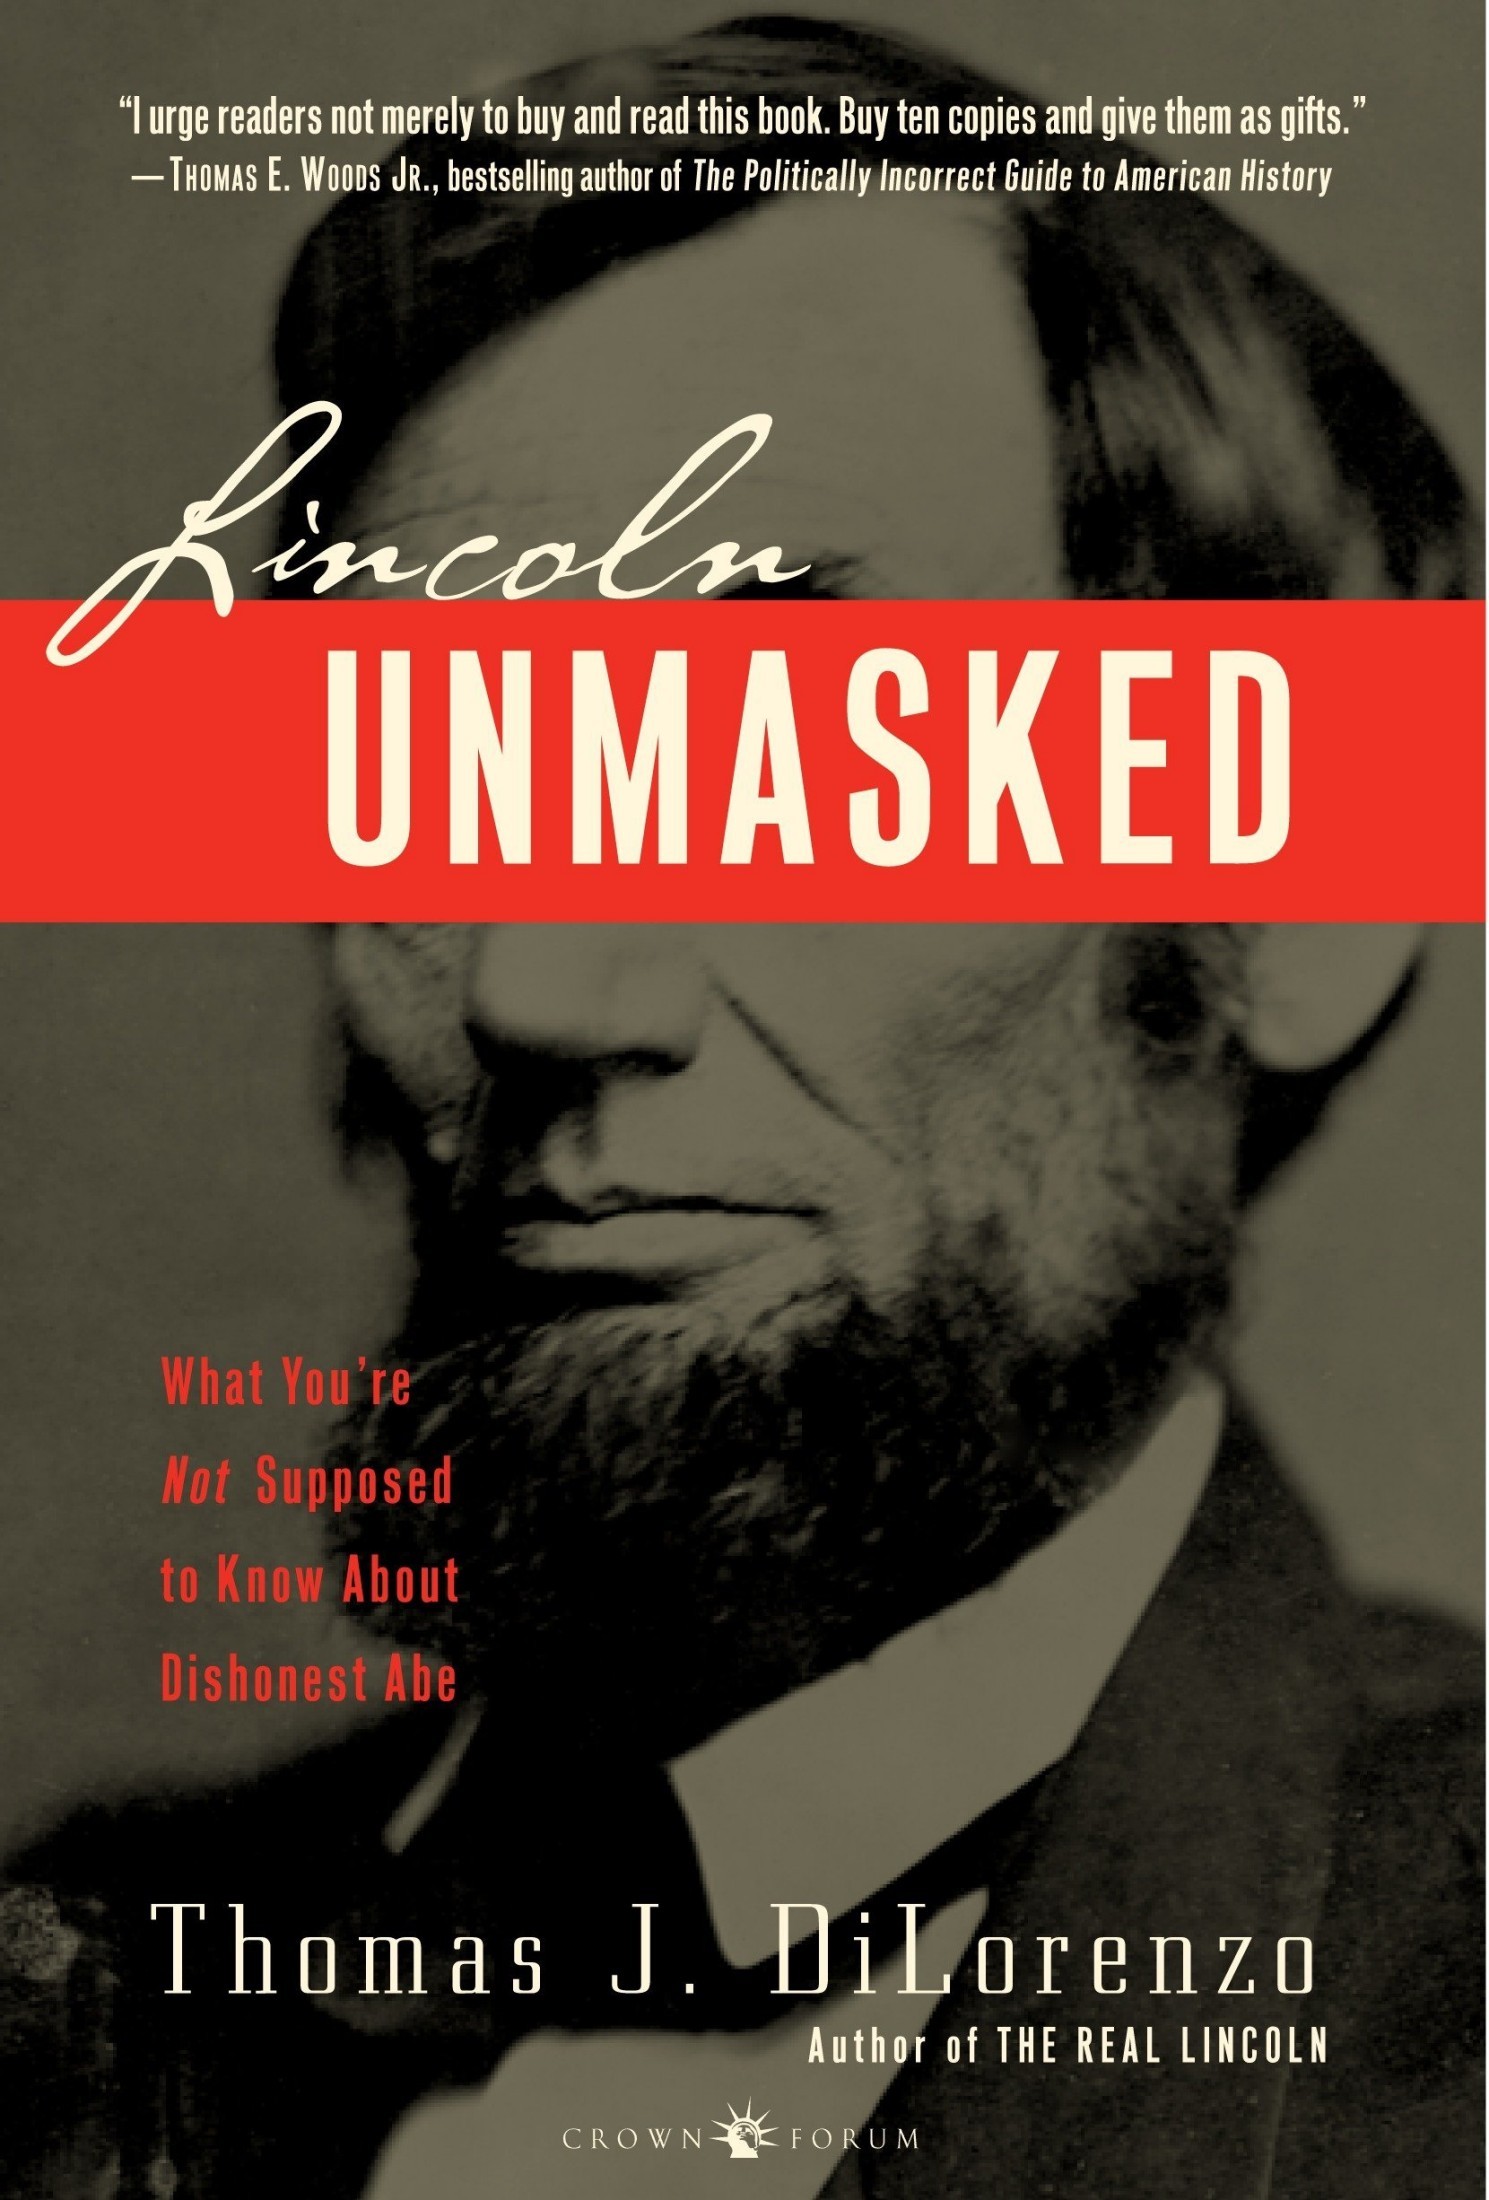 Lincoln Unmasked: What You're Not Supposed to Know About Dishonest Abe